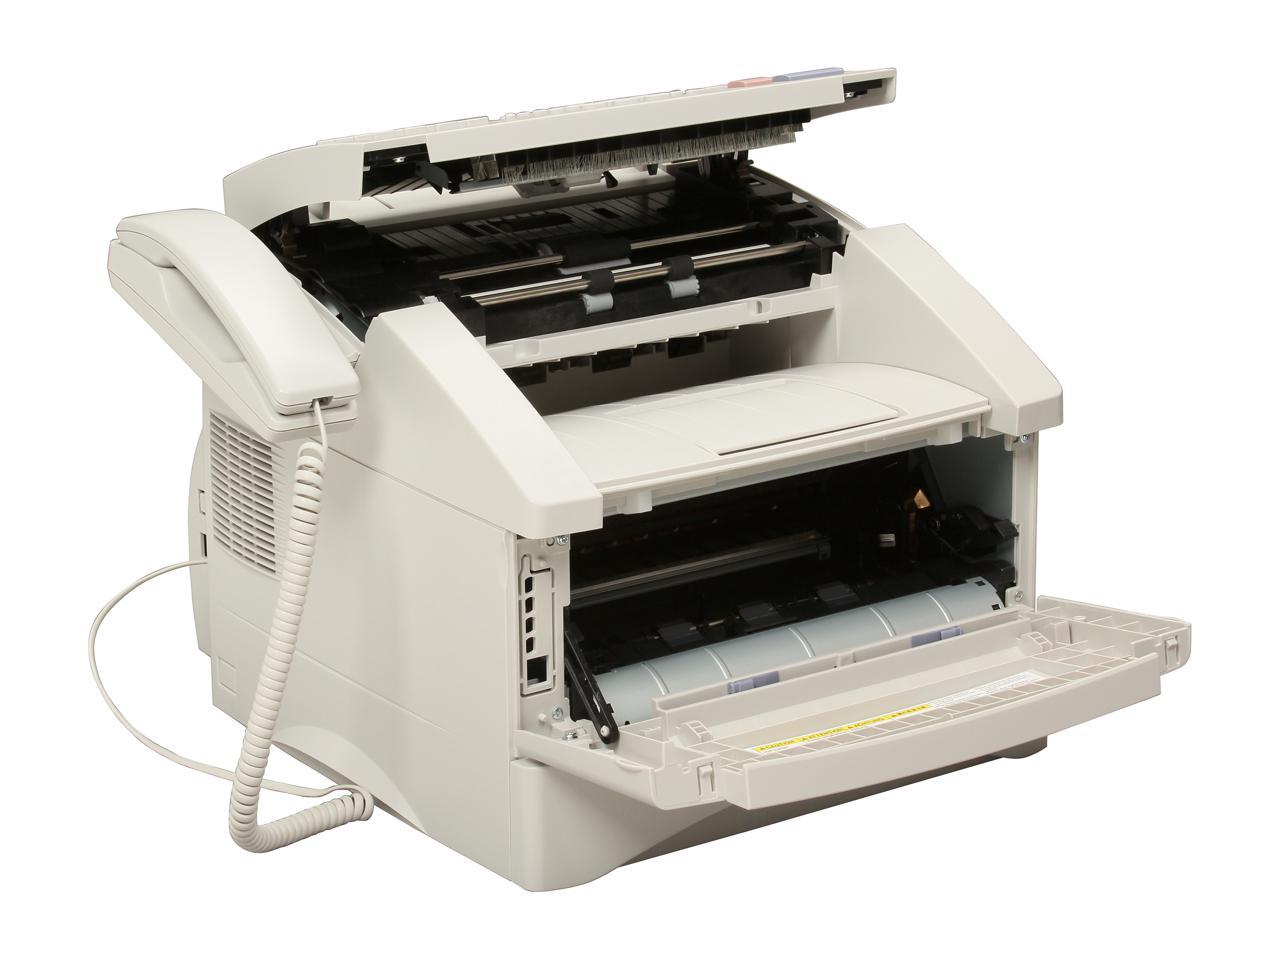 BrotherIntellifax 4750e Plain Paper Fax Inc.,works as a printer and copier 